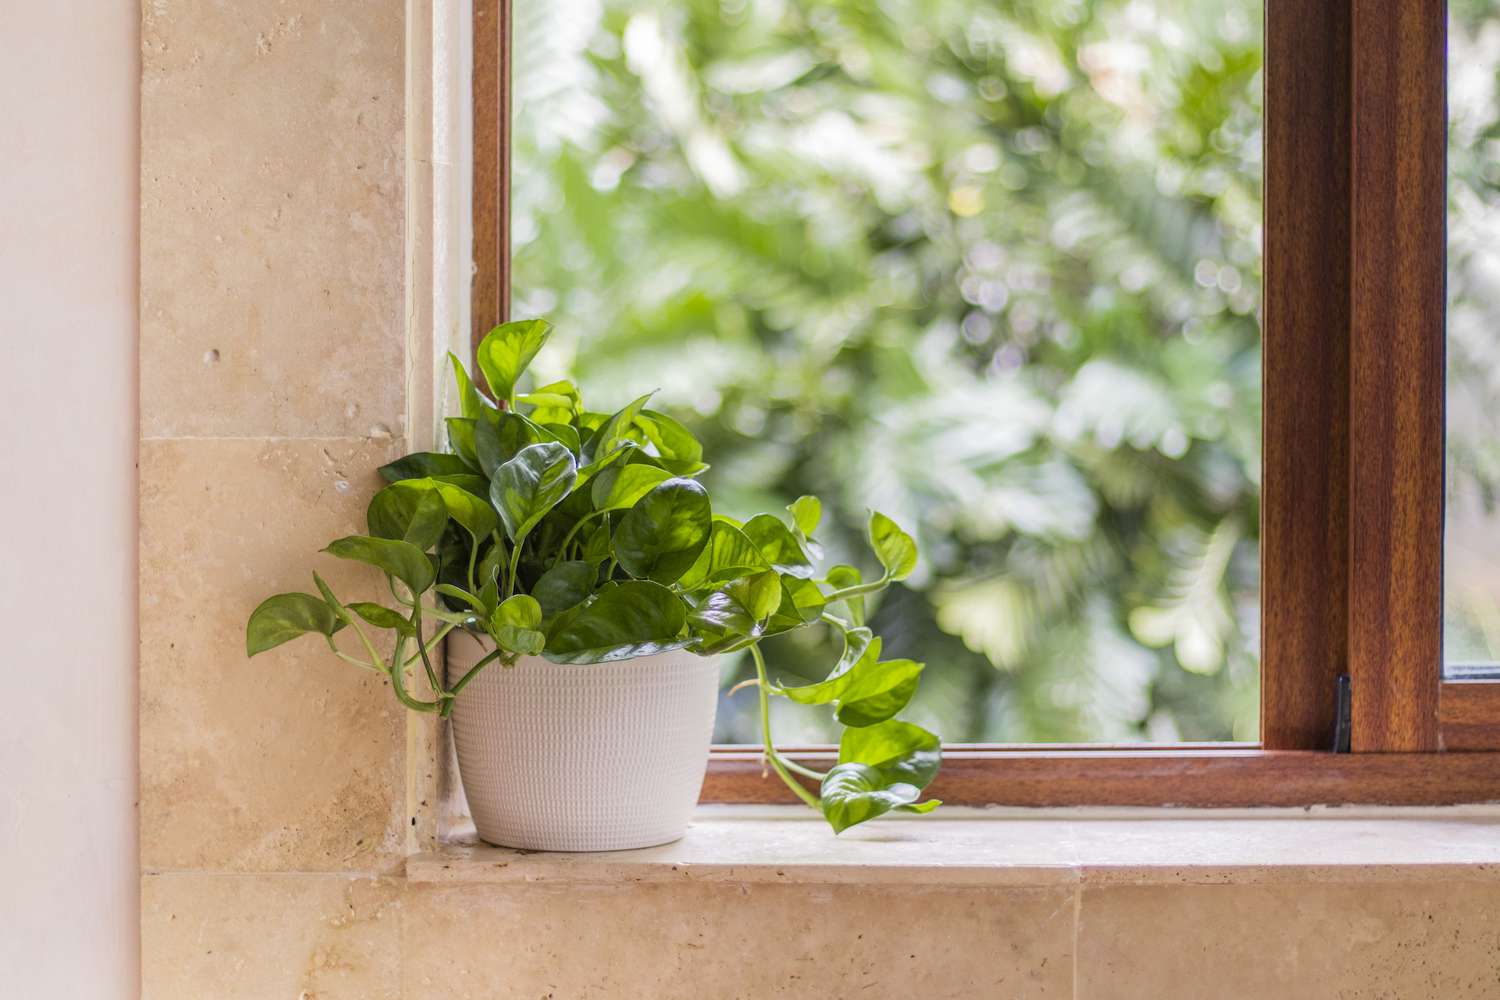 Global Greens Pothos Plant in windowsill with trailing leaves